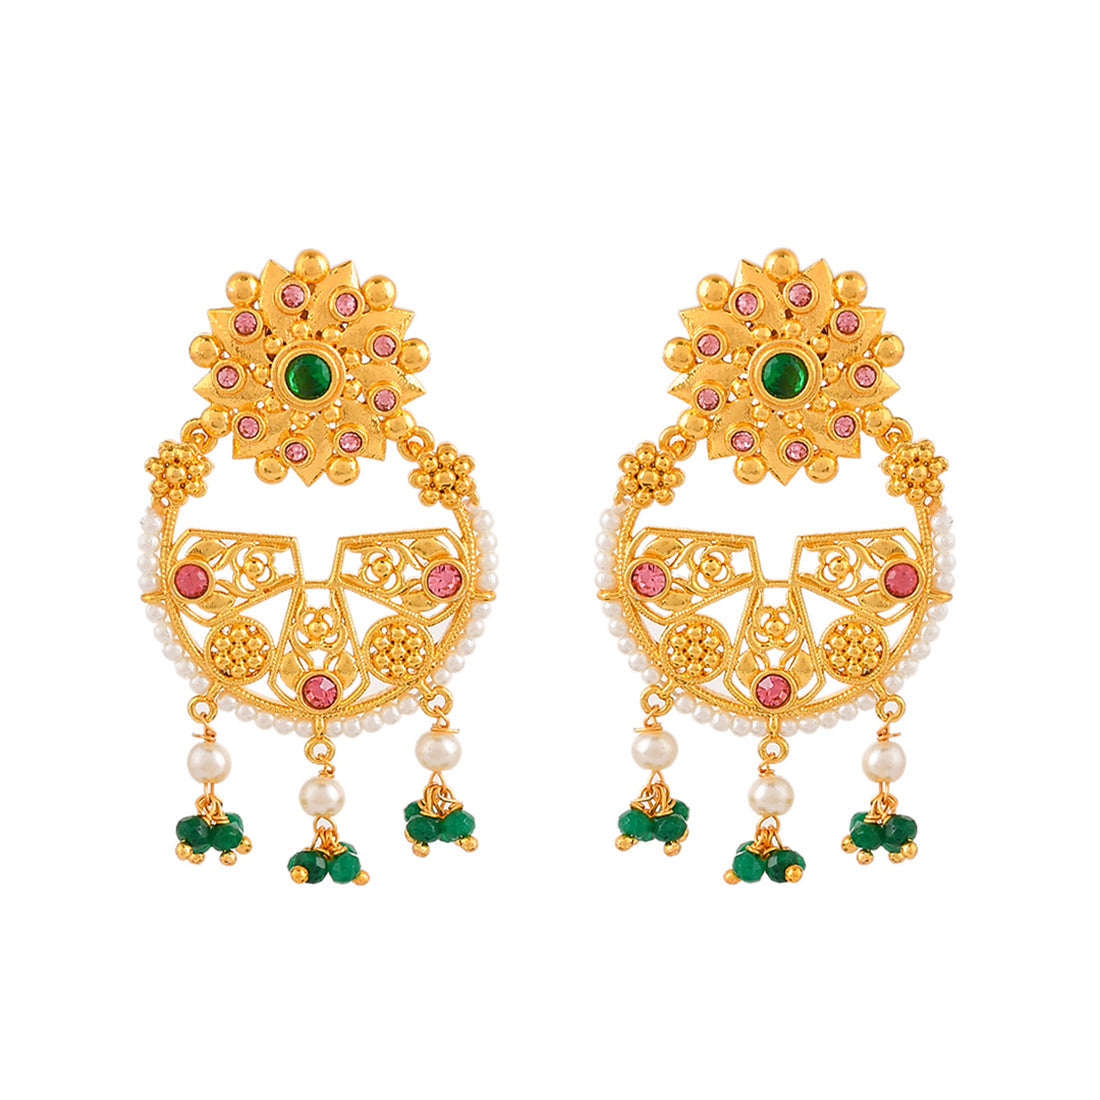 Women's Abharan Green Stones And White Pearls Floral Earrings - Voylla